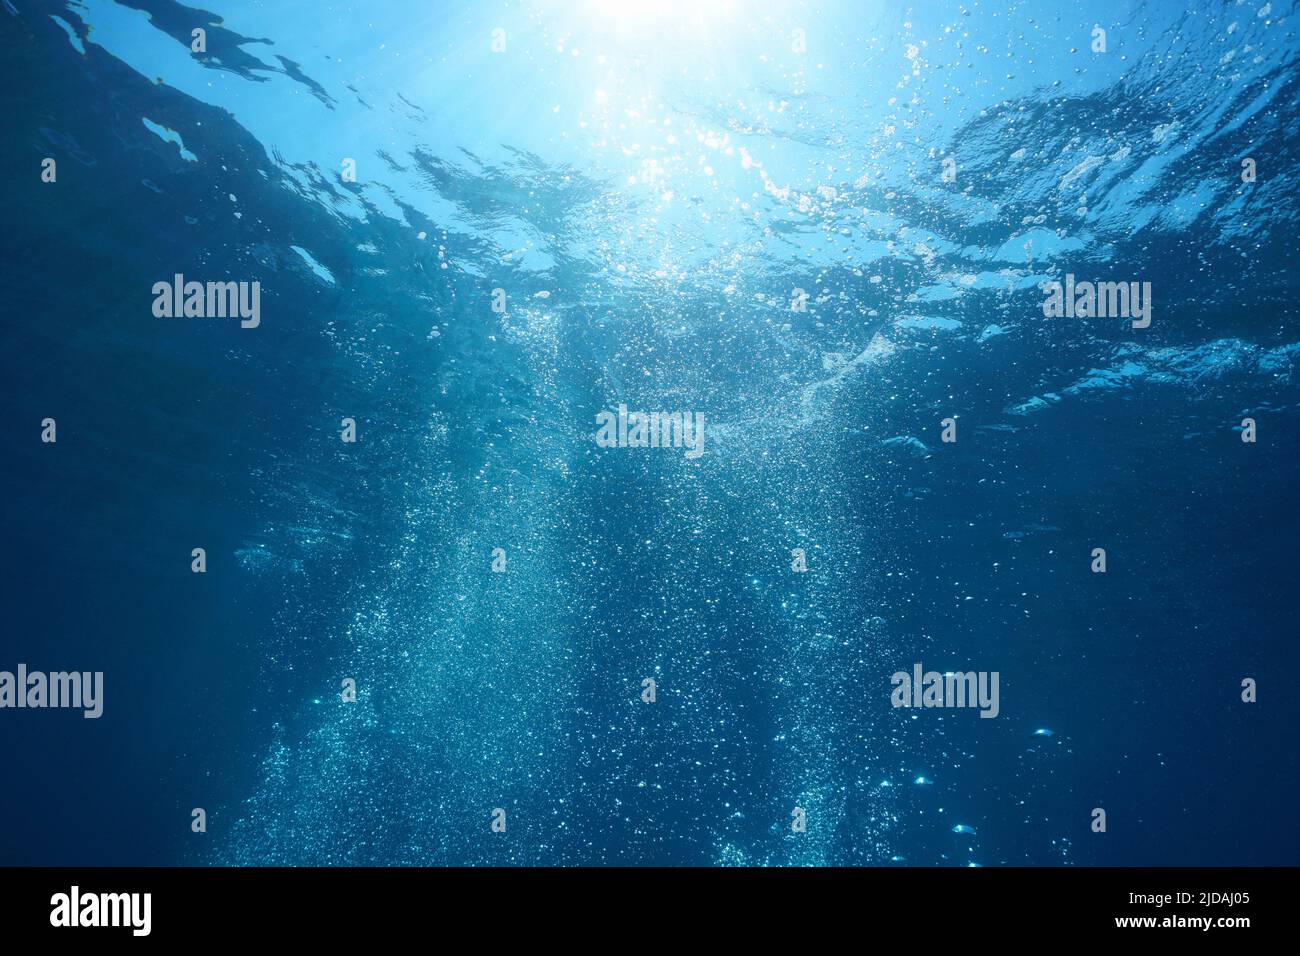 Underwater air bubbles in the sea rising to water surface, natural scene, Mediterranean Stock Photo